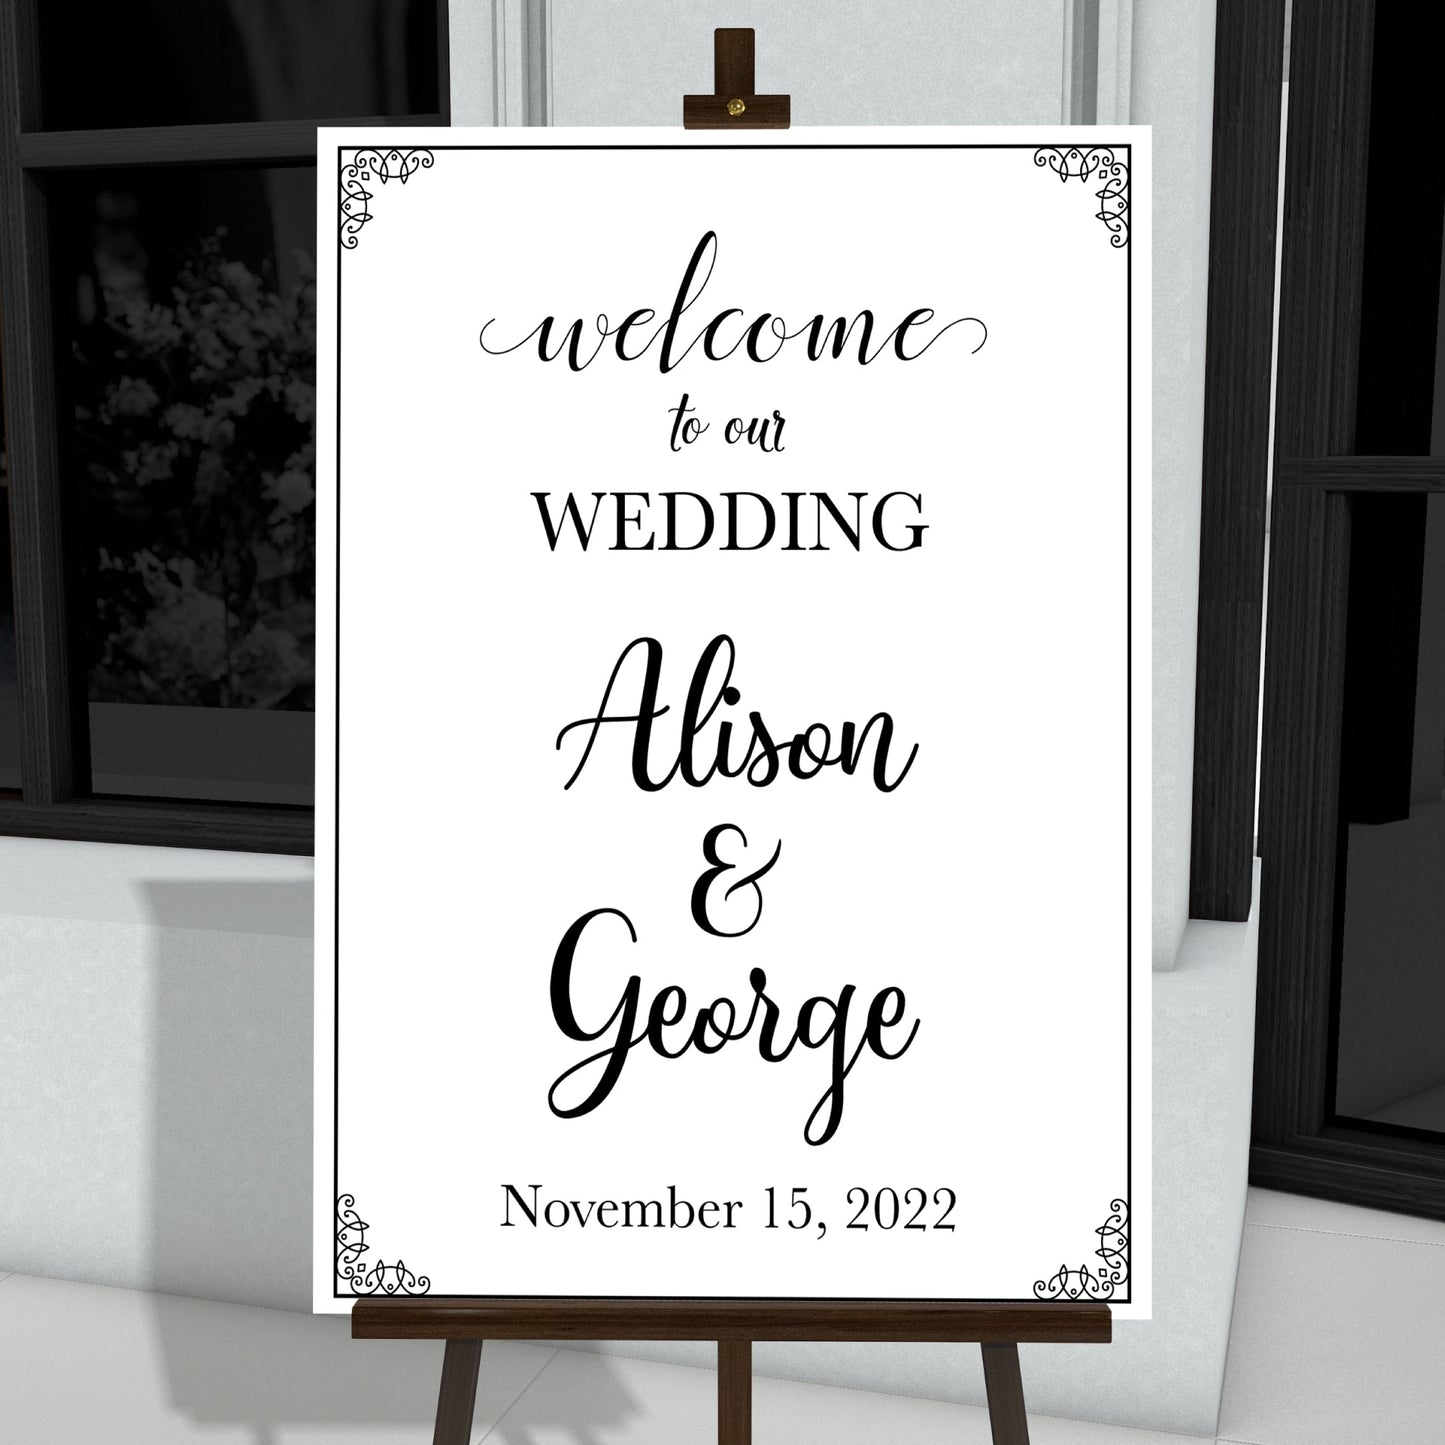 Personalized Welcome To Wedding Sign